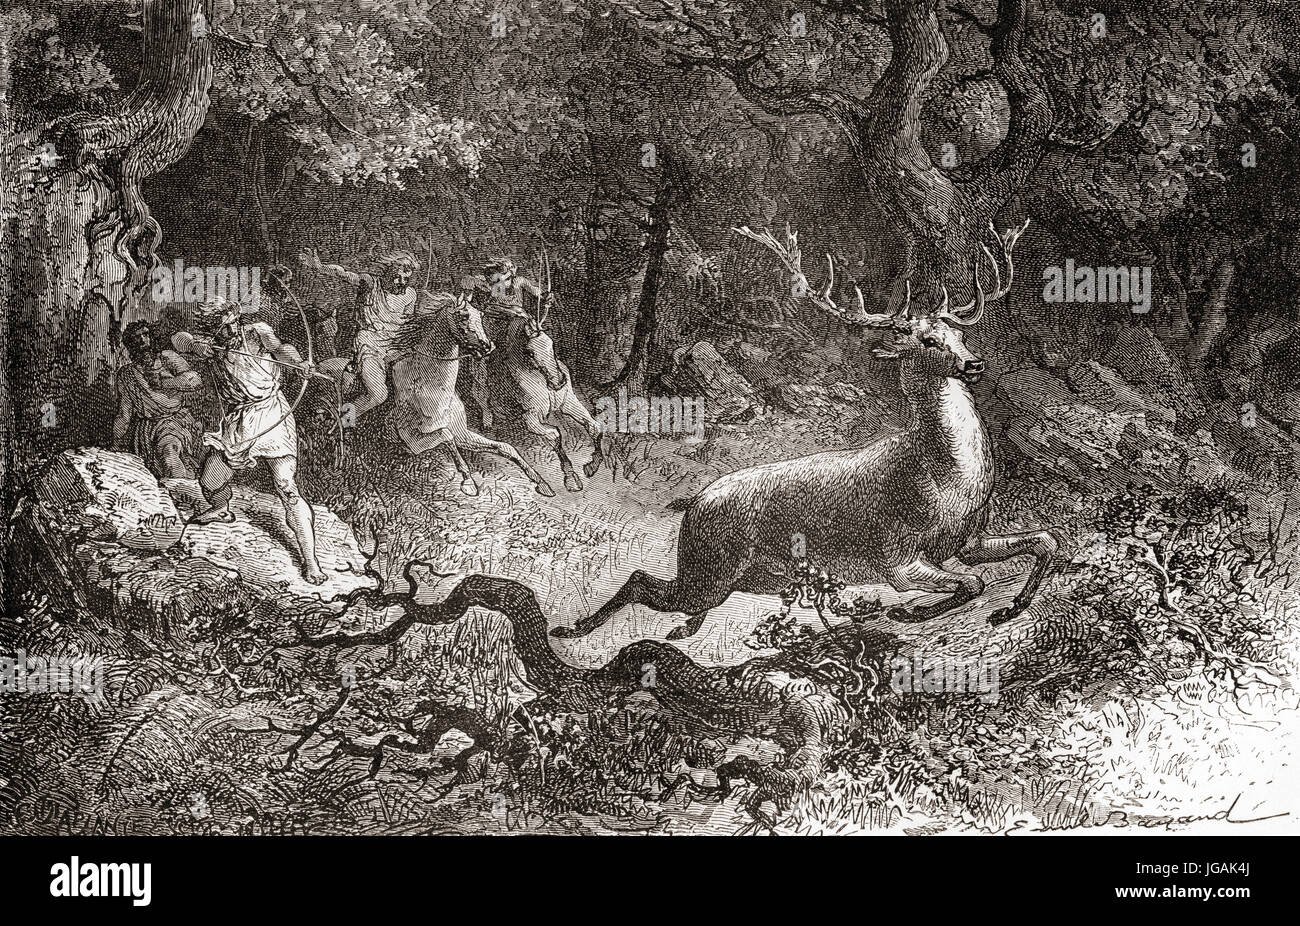 Men hunting a deer during the Bronze Age.  From L'Homme Primitif, published 1870. Stock Photo